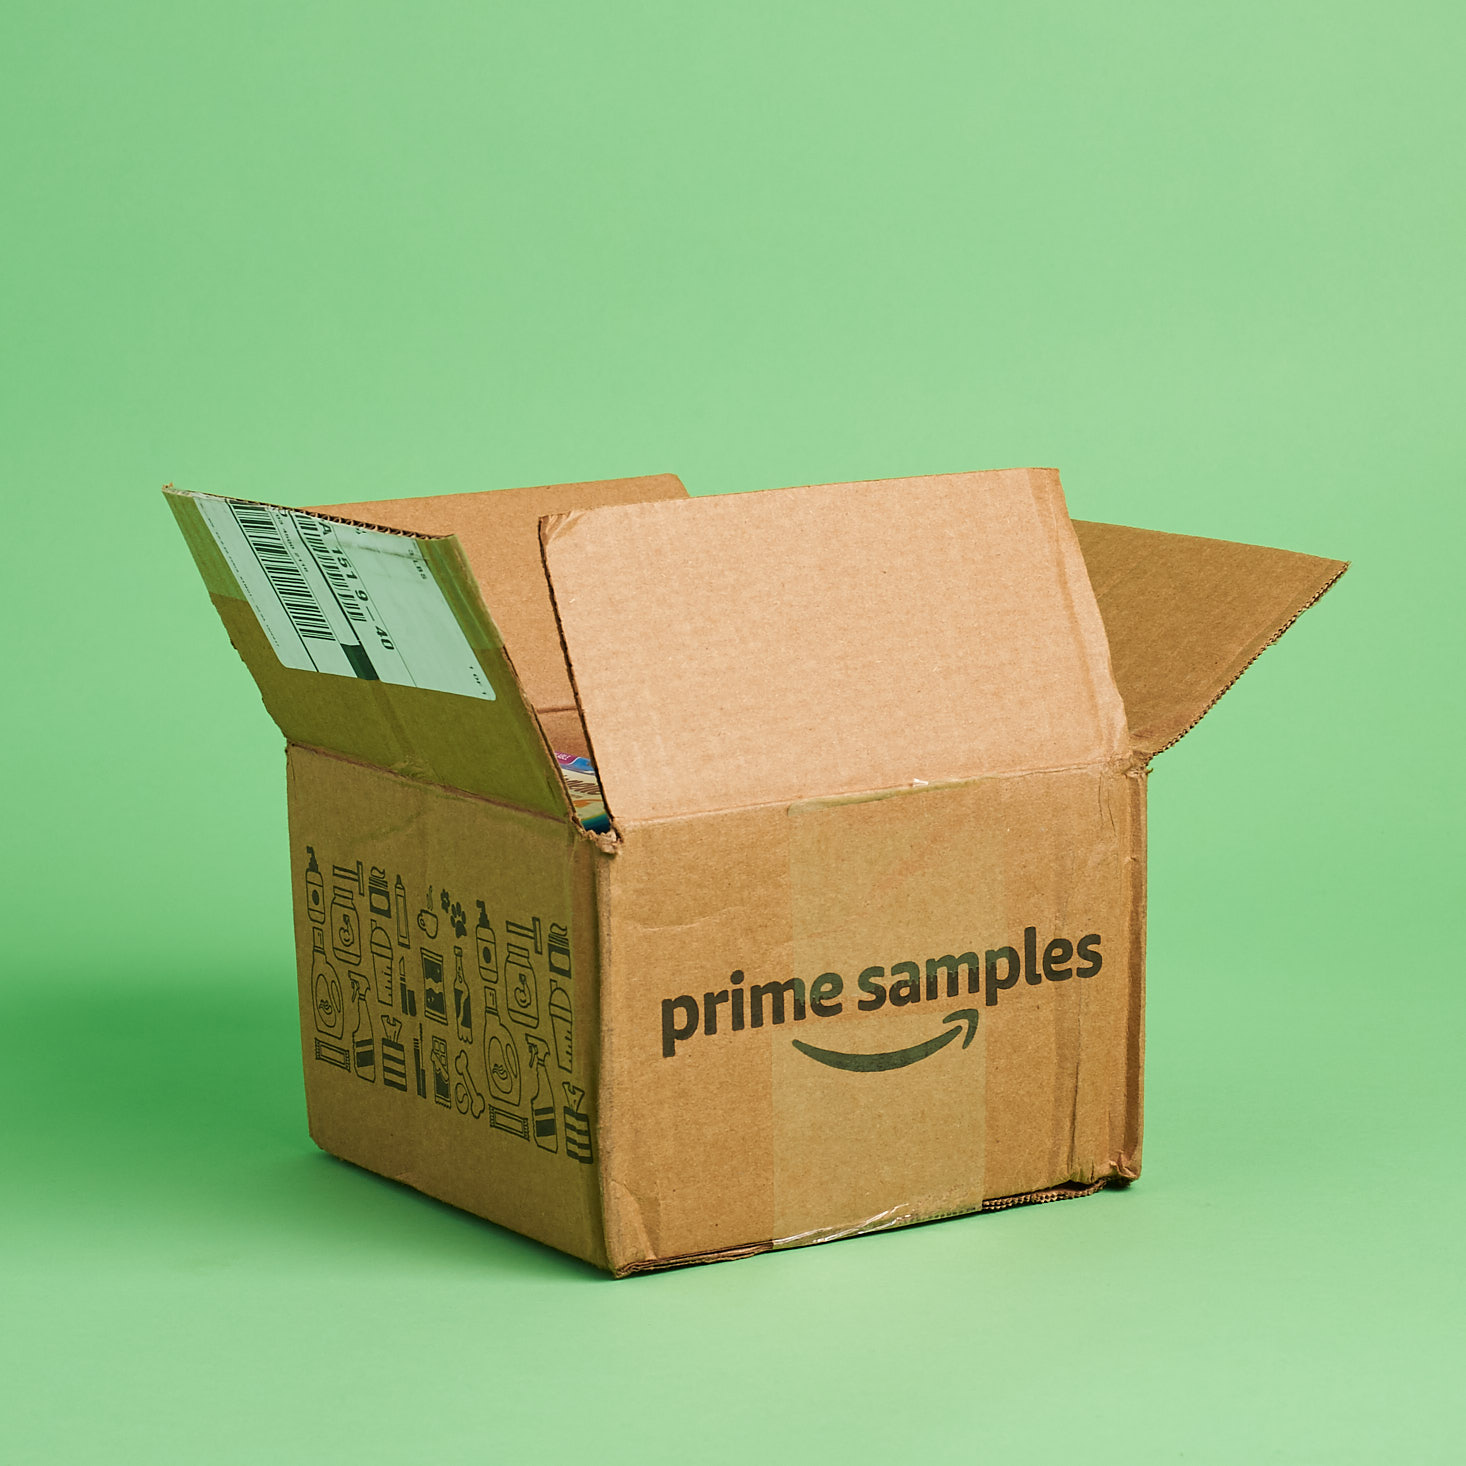 Amazon Household Essentials Sample Box Review – December 2017